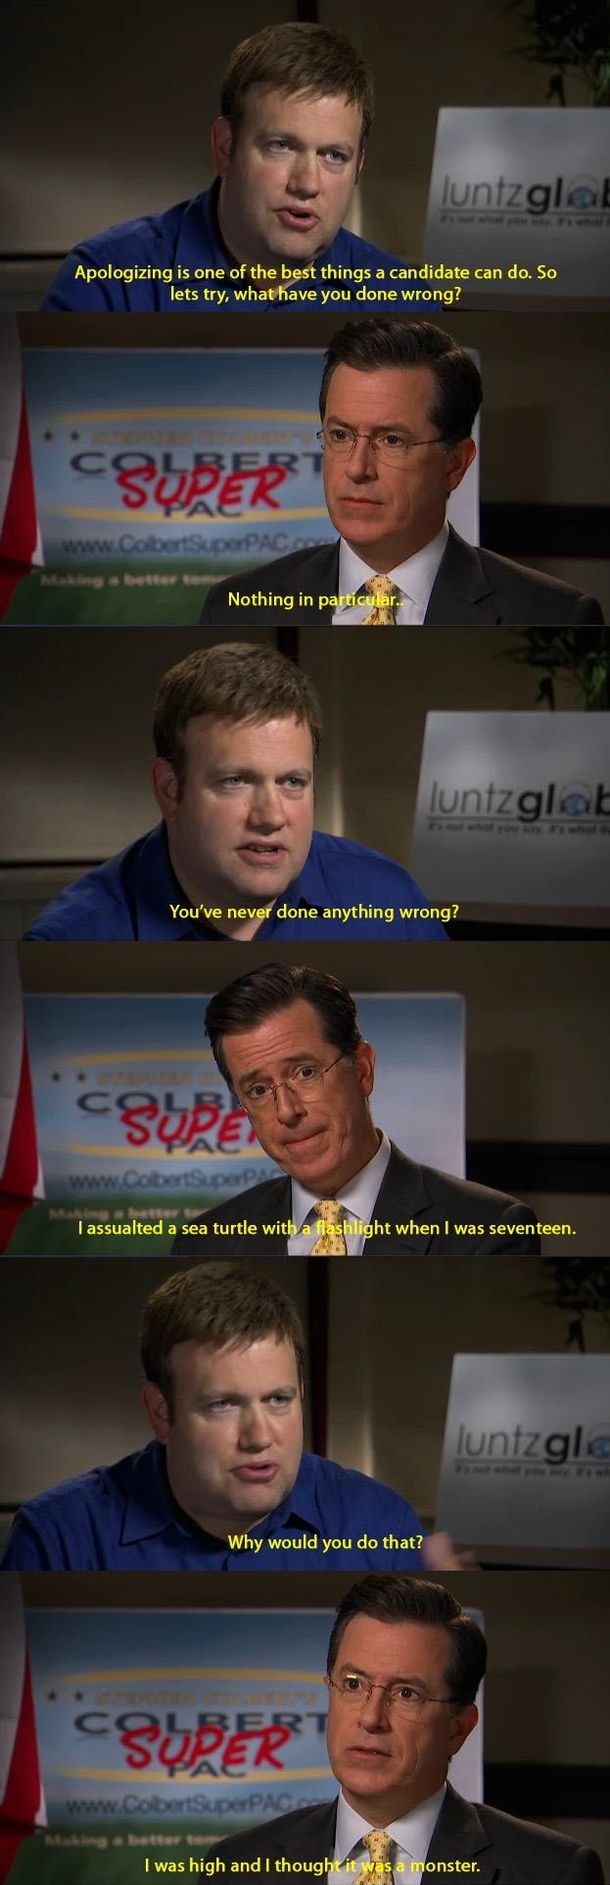 I would go gay for Colbert